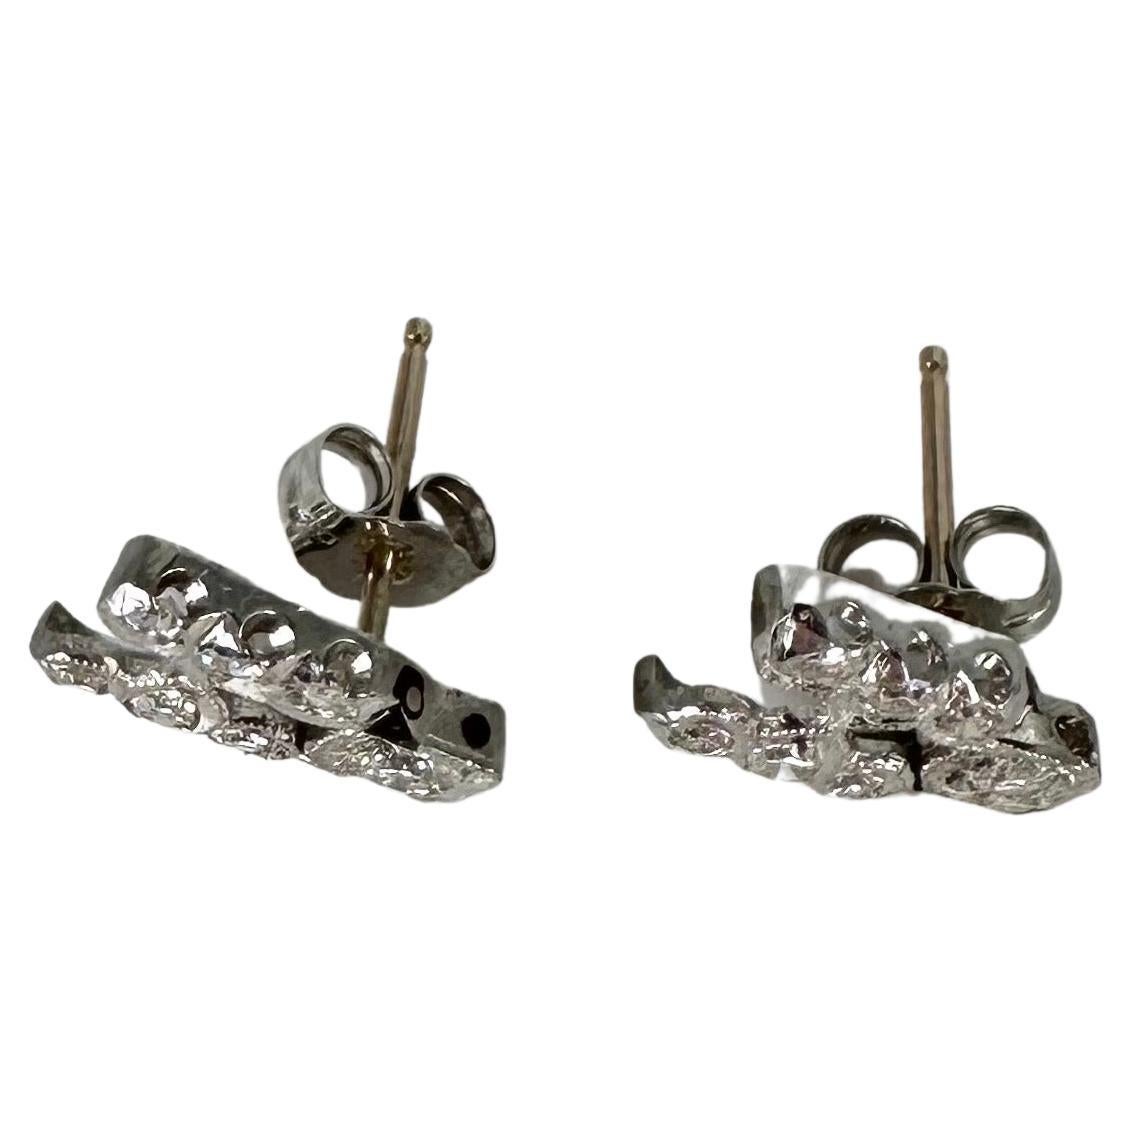 Vintage diamond stud earrings in 14KT white gold. Very interesting artwork, some art deco motif present with some classical earrings style.

GOLD: 14KT gold
NATURAL DIAMOND(S)
Clarity/Color: VS/F
Carat:0.25ct
Grams:2.52
Item#: 150-000160MOT



WHAT